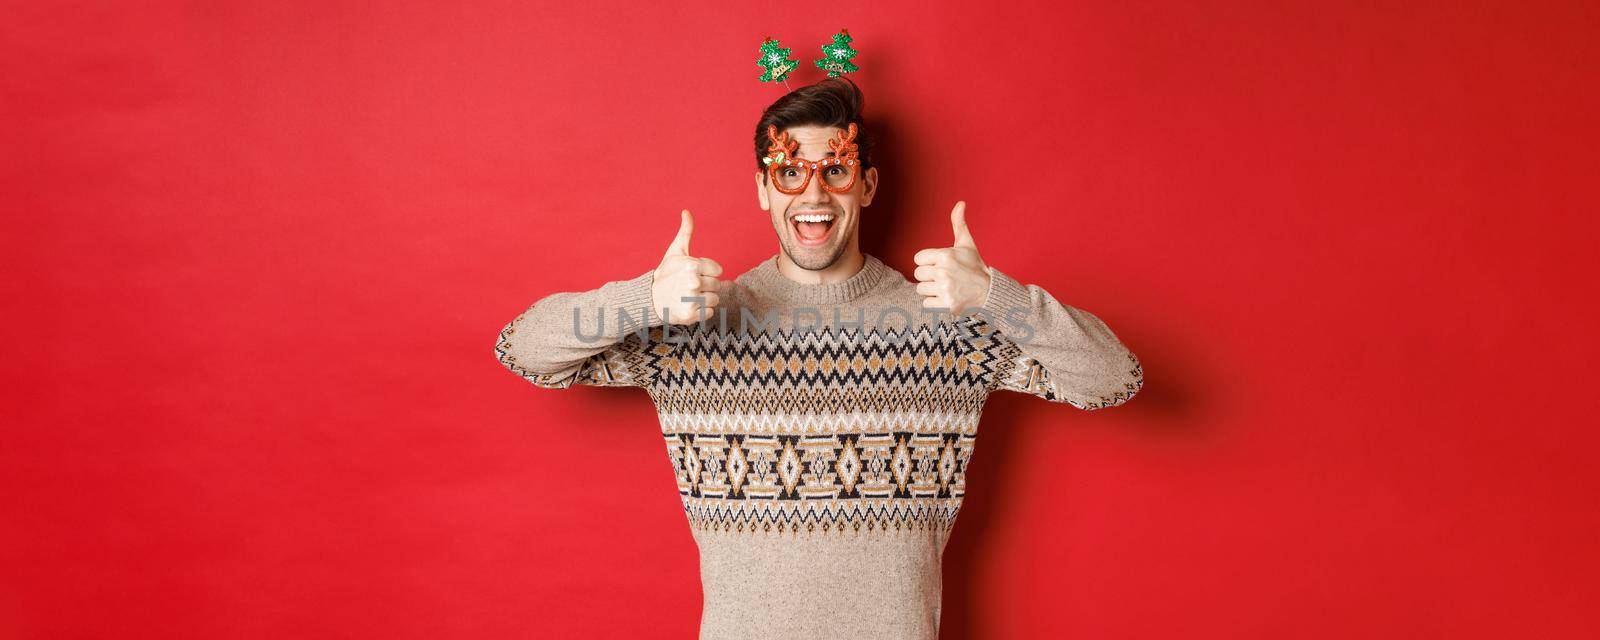 Portrait of satisfied and happy man in christmas sweater and party glasses, showing thumbs-up, wishing happy new year, standing over red background.